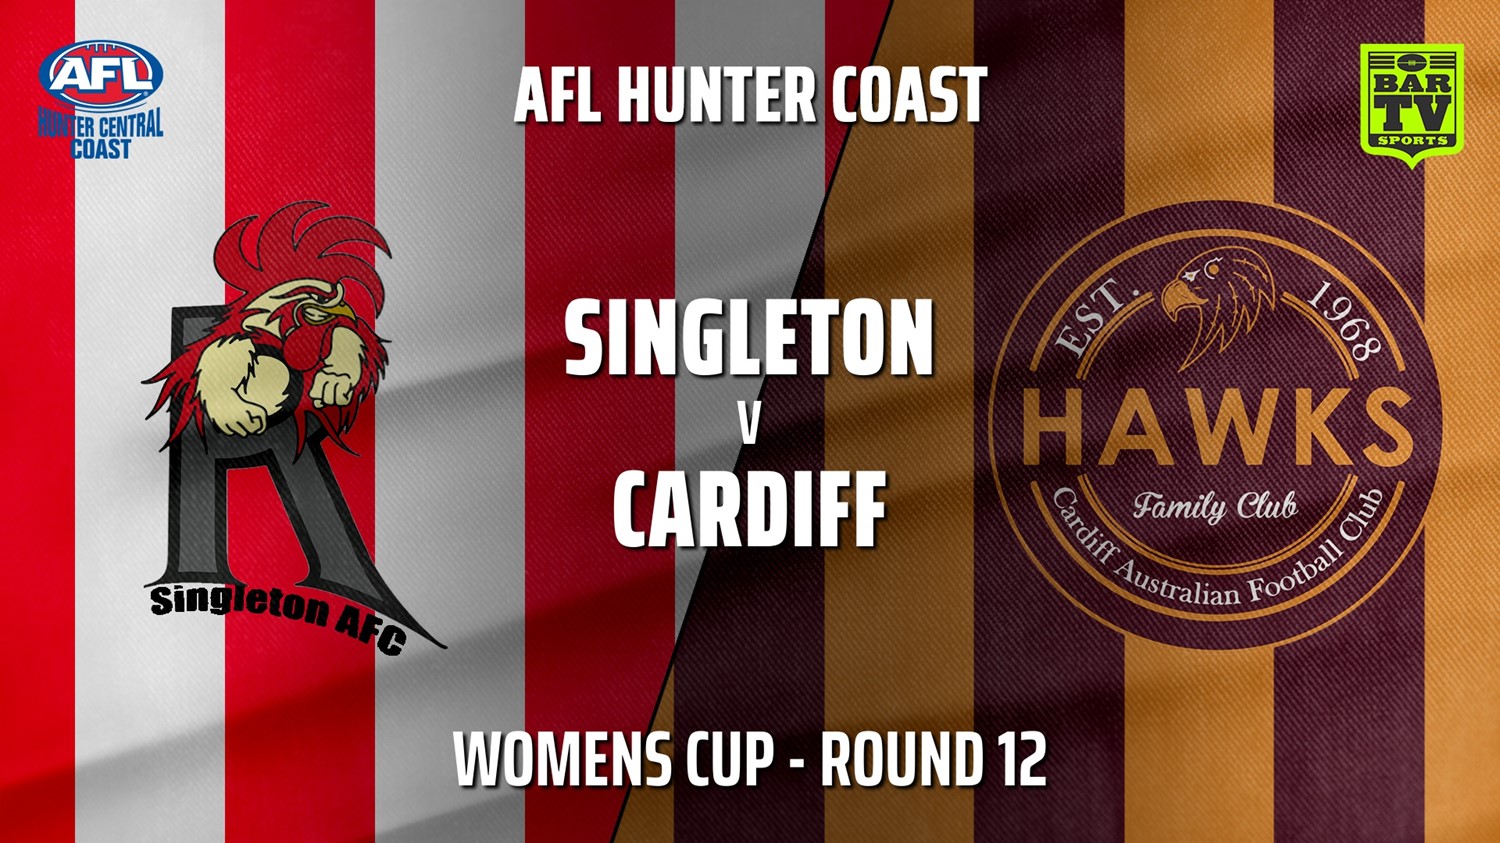 210710-AFL Hunter Central Coast Round 12 - Womens Cup - Singleton Roosters v Cardiff Hawks Minigame Slate Image